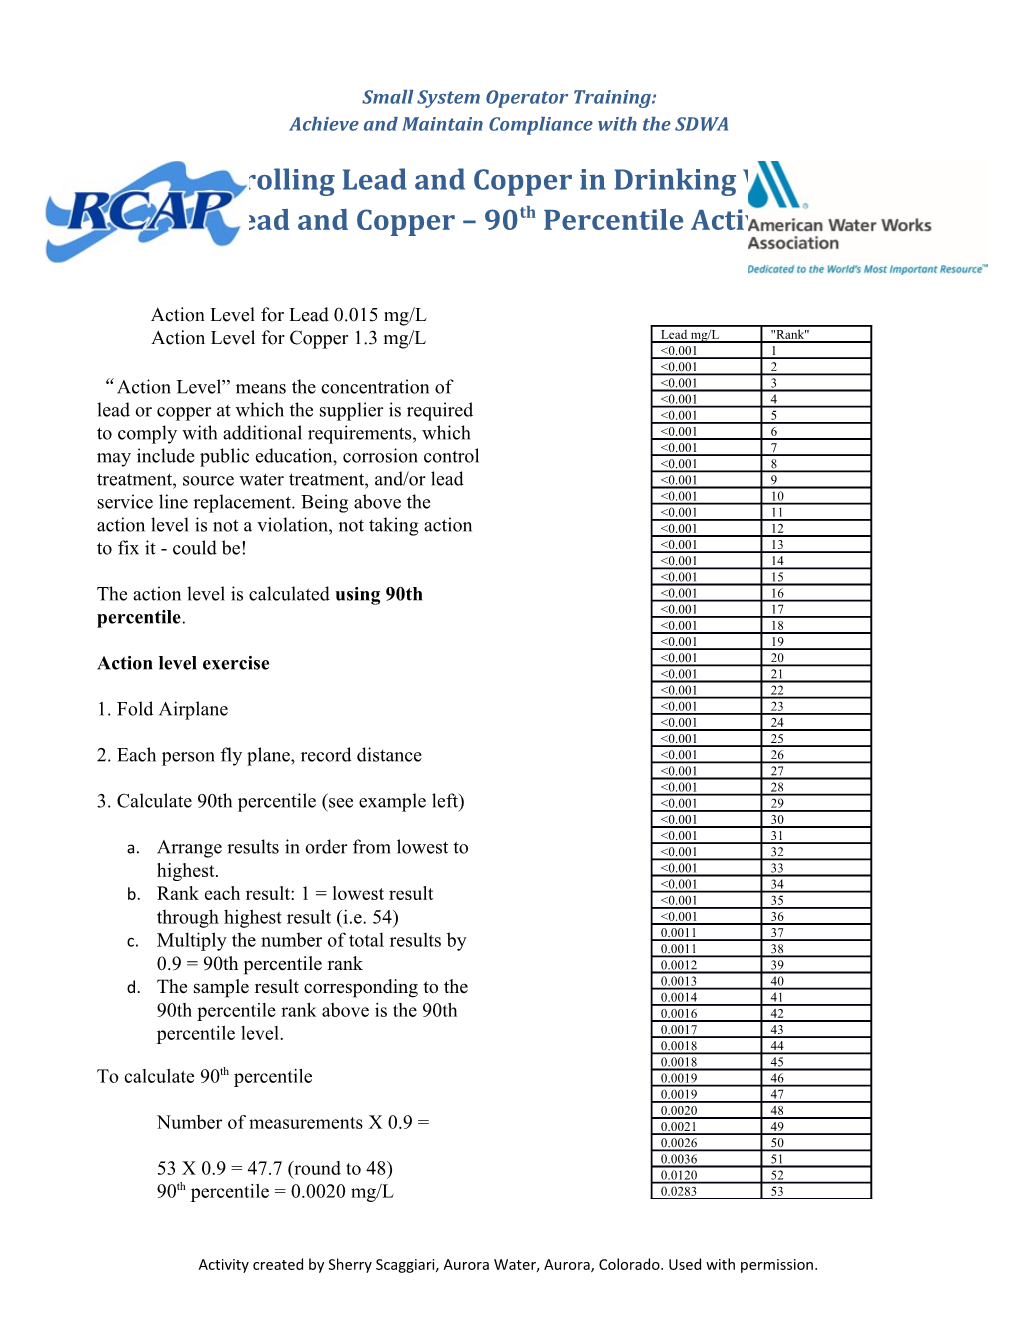 Controlling Lead and Copper in Drinking Water